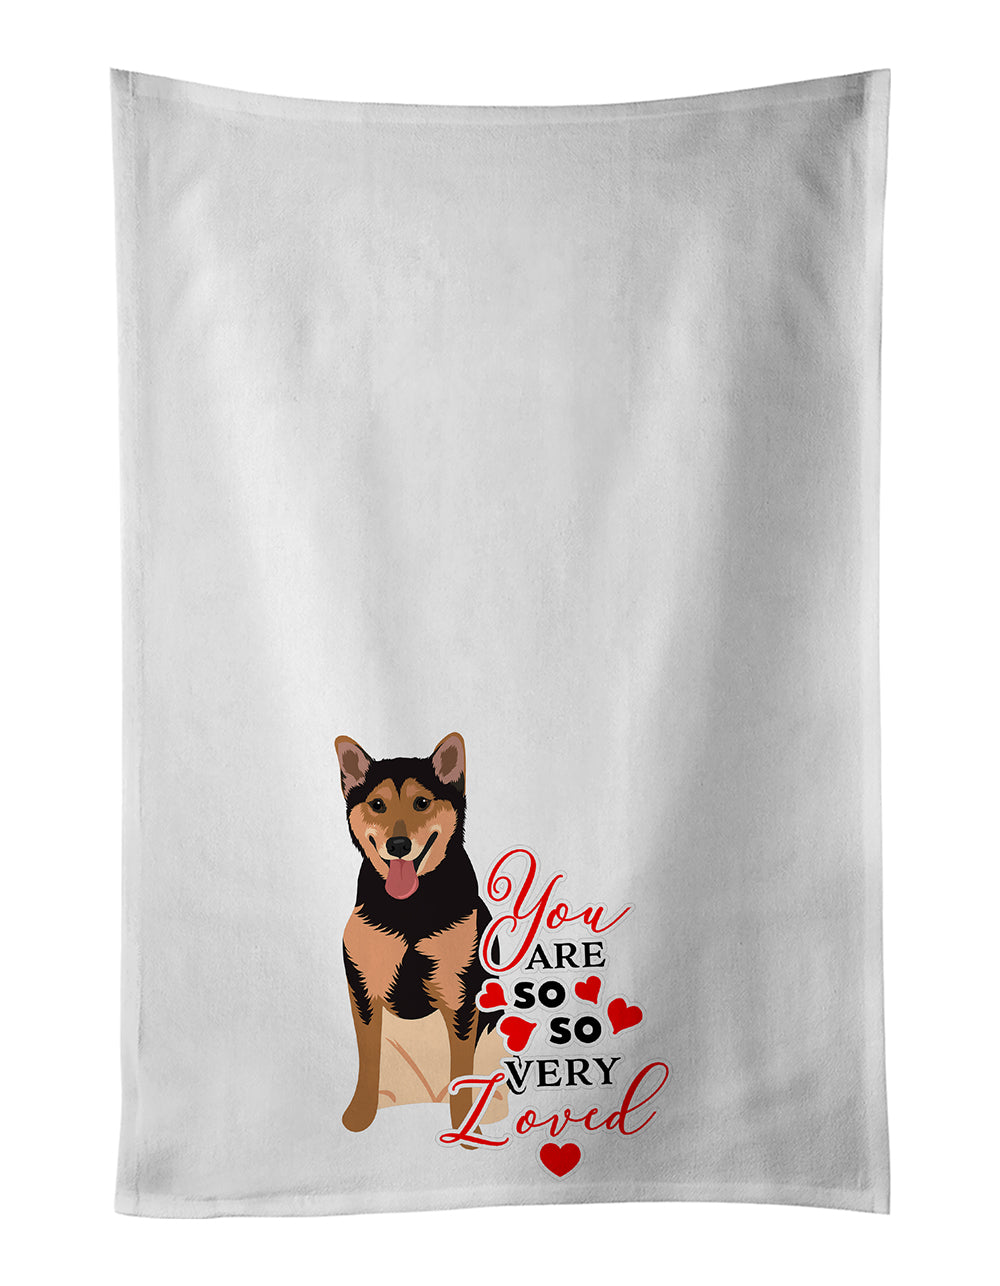 Buy this Shiba Inu Black and Tan so Loved White Kitchen Towel Set of 2